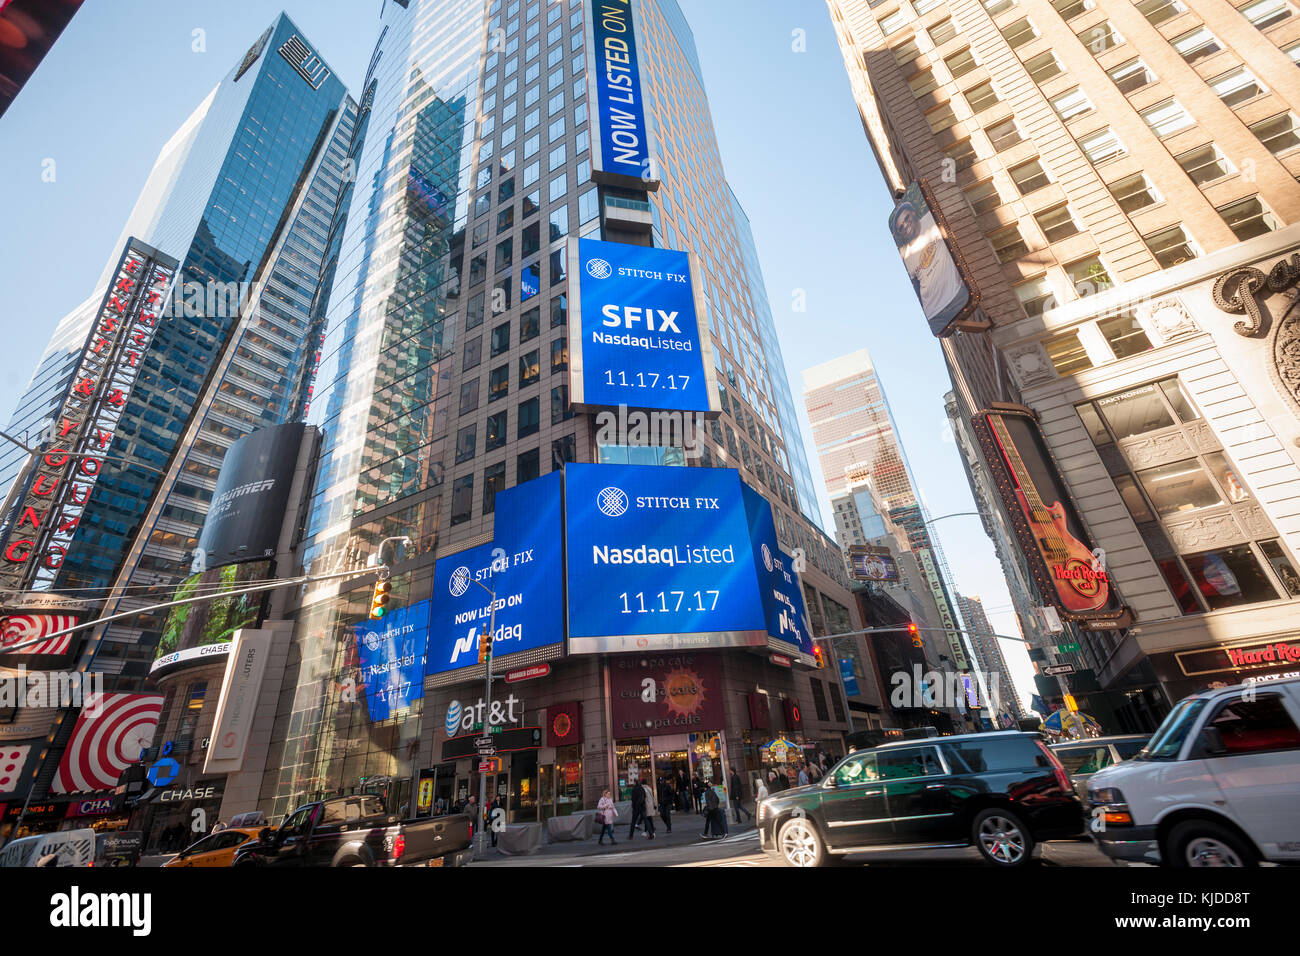 Video screens in Times Square display advertising for the first day of sale of the Stitch Fix initial public offering on the Nasdaq exchange on Friday, November 17, 2017. The opening price of $16.90 values Stitch Fix at about $1.63 billion. Stitch Fix is a subscription box service providing customers monthly shipment of clothing based on their style preferences. Subscription services suffer from the high cost of obtaining and retaining customers. (© Richard B. Levine) Stock Photo